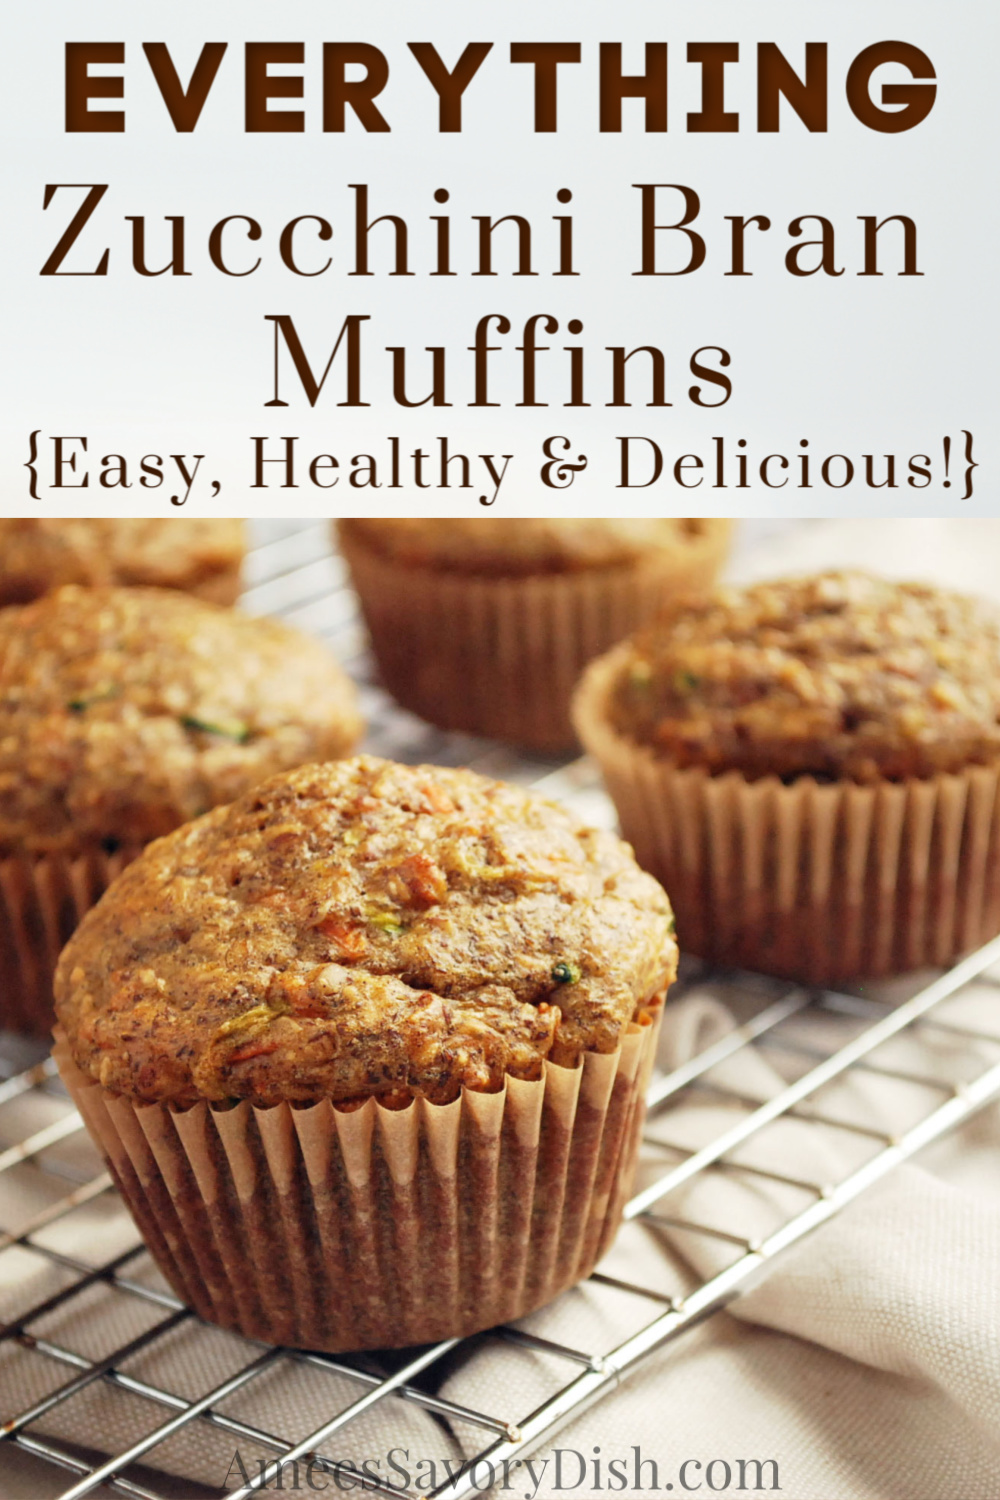 These zucchini bran muffins are made with shredded zucchini and carrots, unbleached flour, ground flaxseed, oat bran, raisins, and walnuts.  This healthier muffin recipe is simple and incredibly delicious!   via @Ameessavorydish